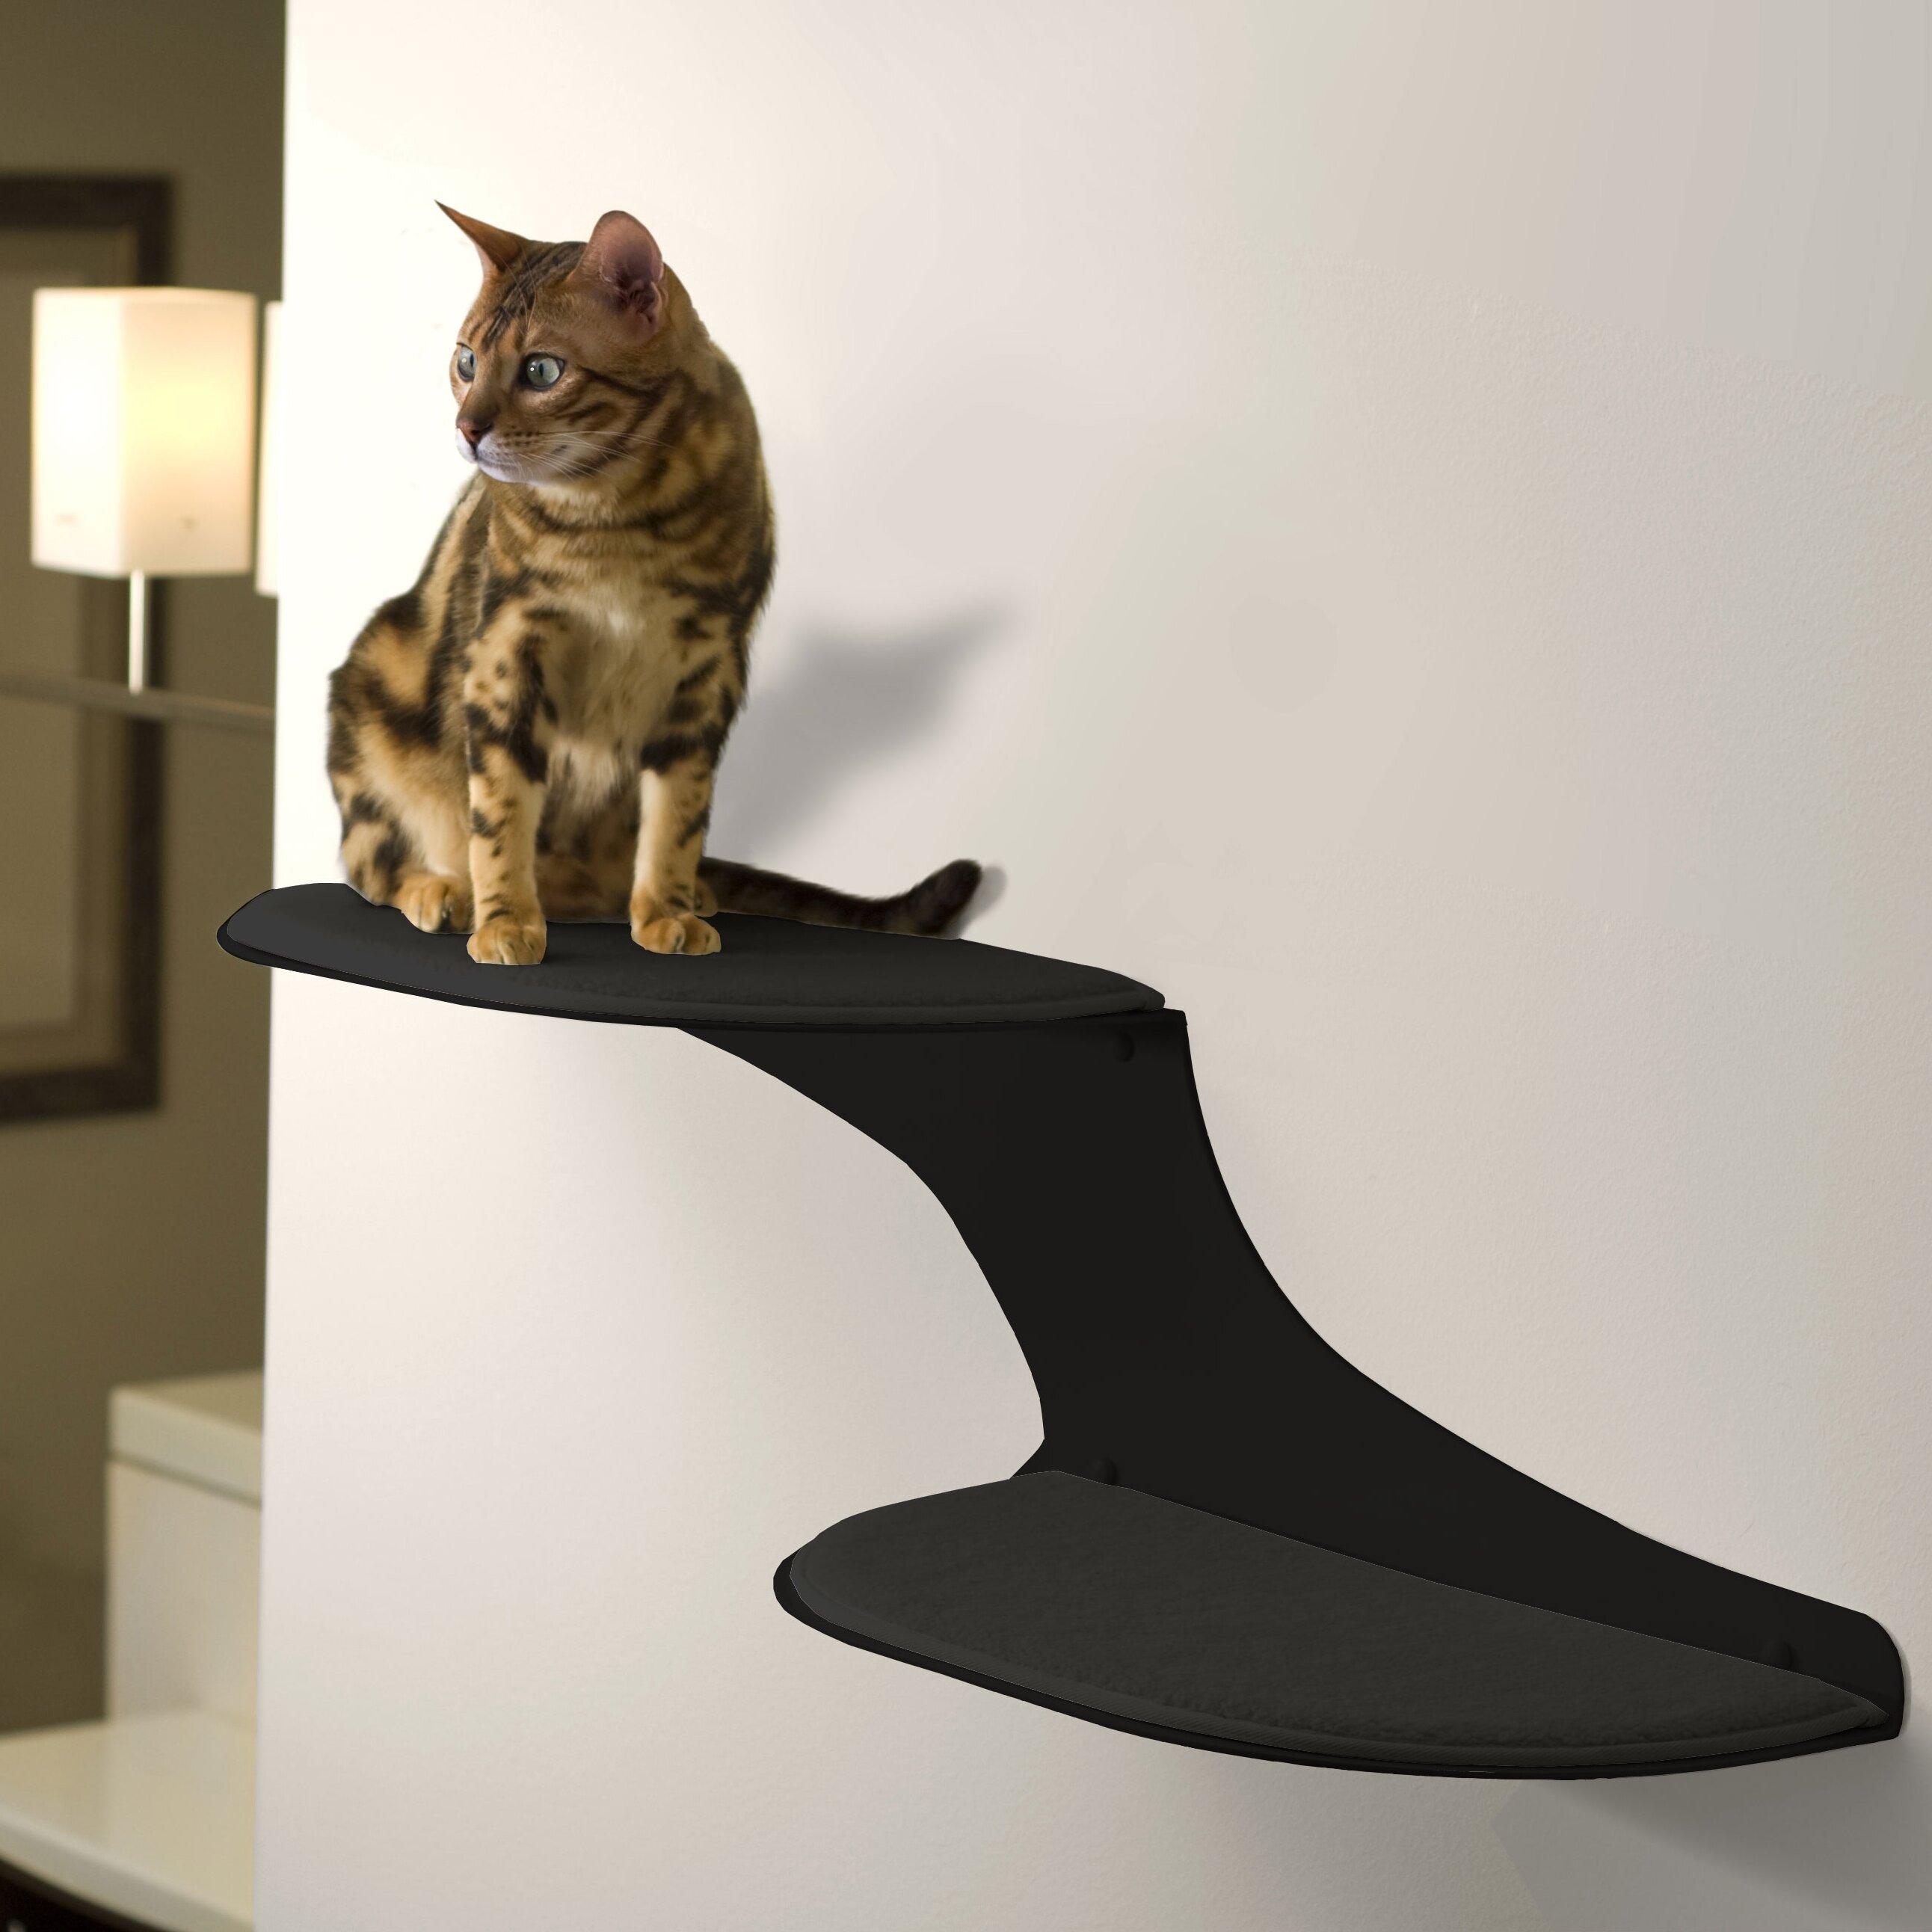 15 Top Pictures Wall Mounted Cat Perch : The Refined Feline Clouds Wall Mounted Cat Perch & Reviews ...